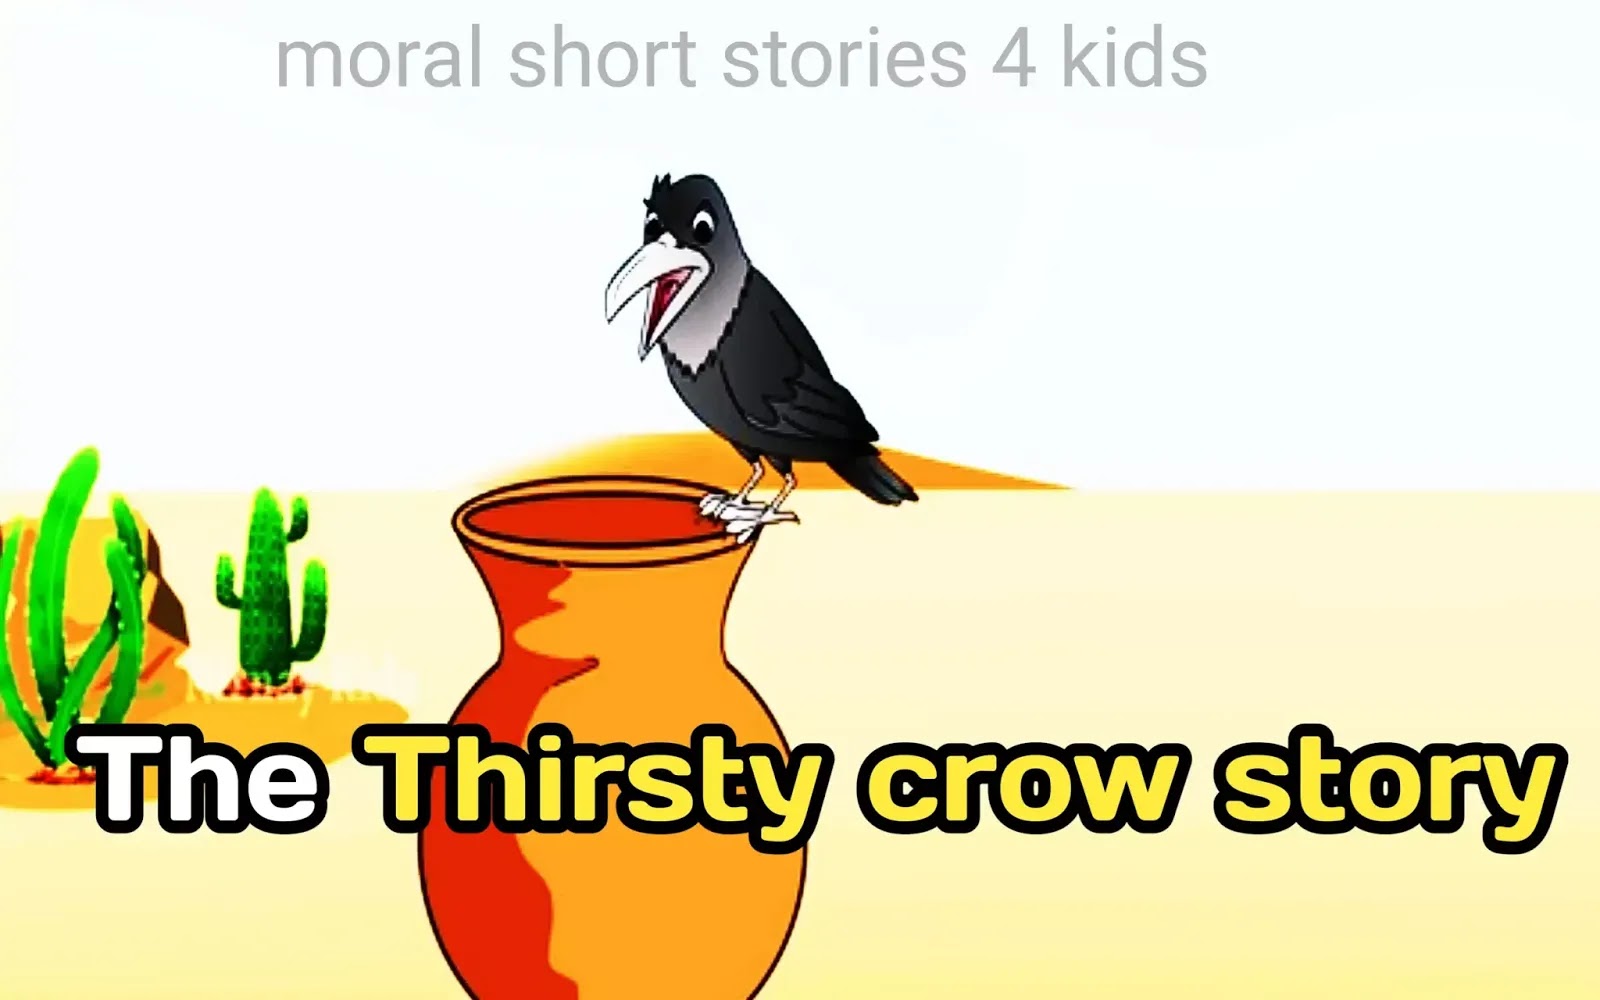 The Thirsty Crow Story with Moral in English for Kids